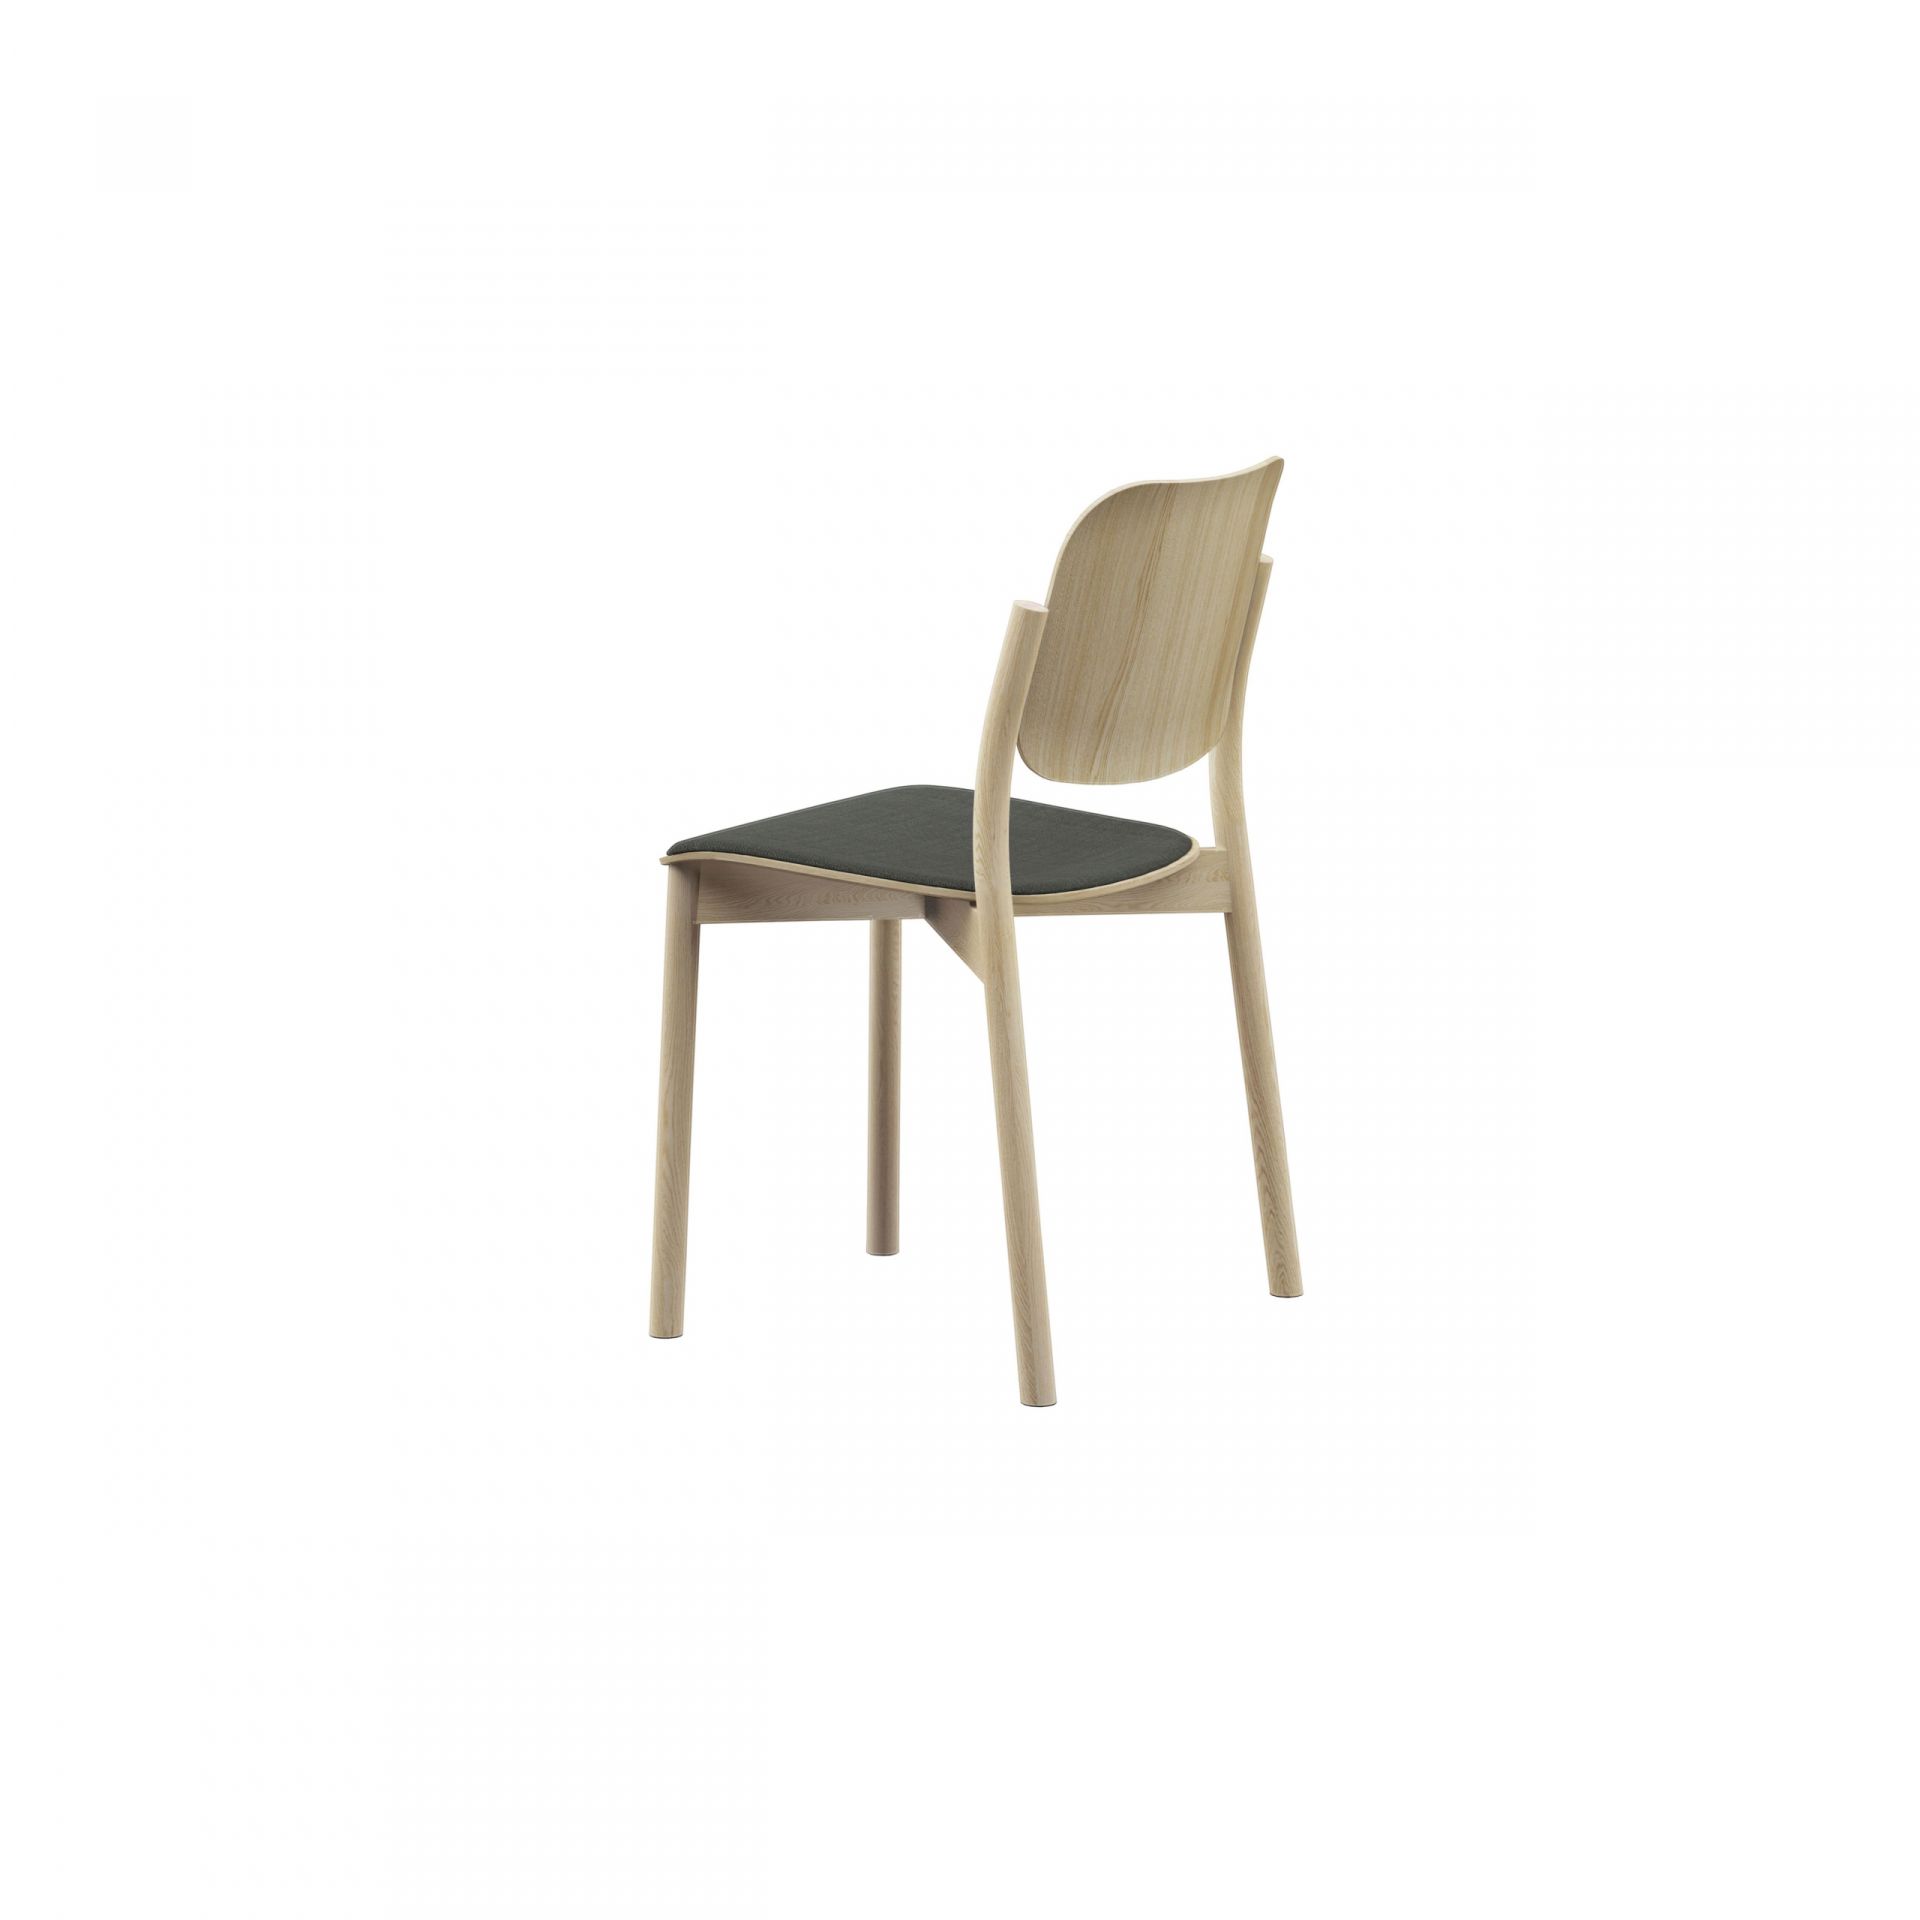 Zoe Wooden chair product image 2